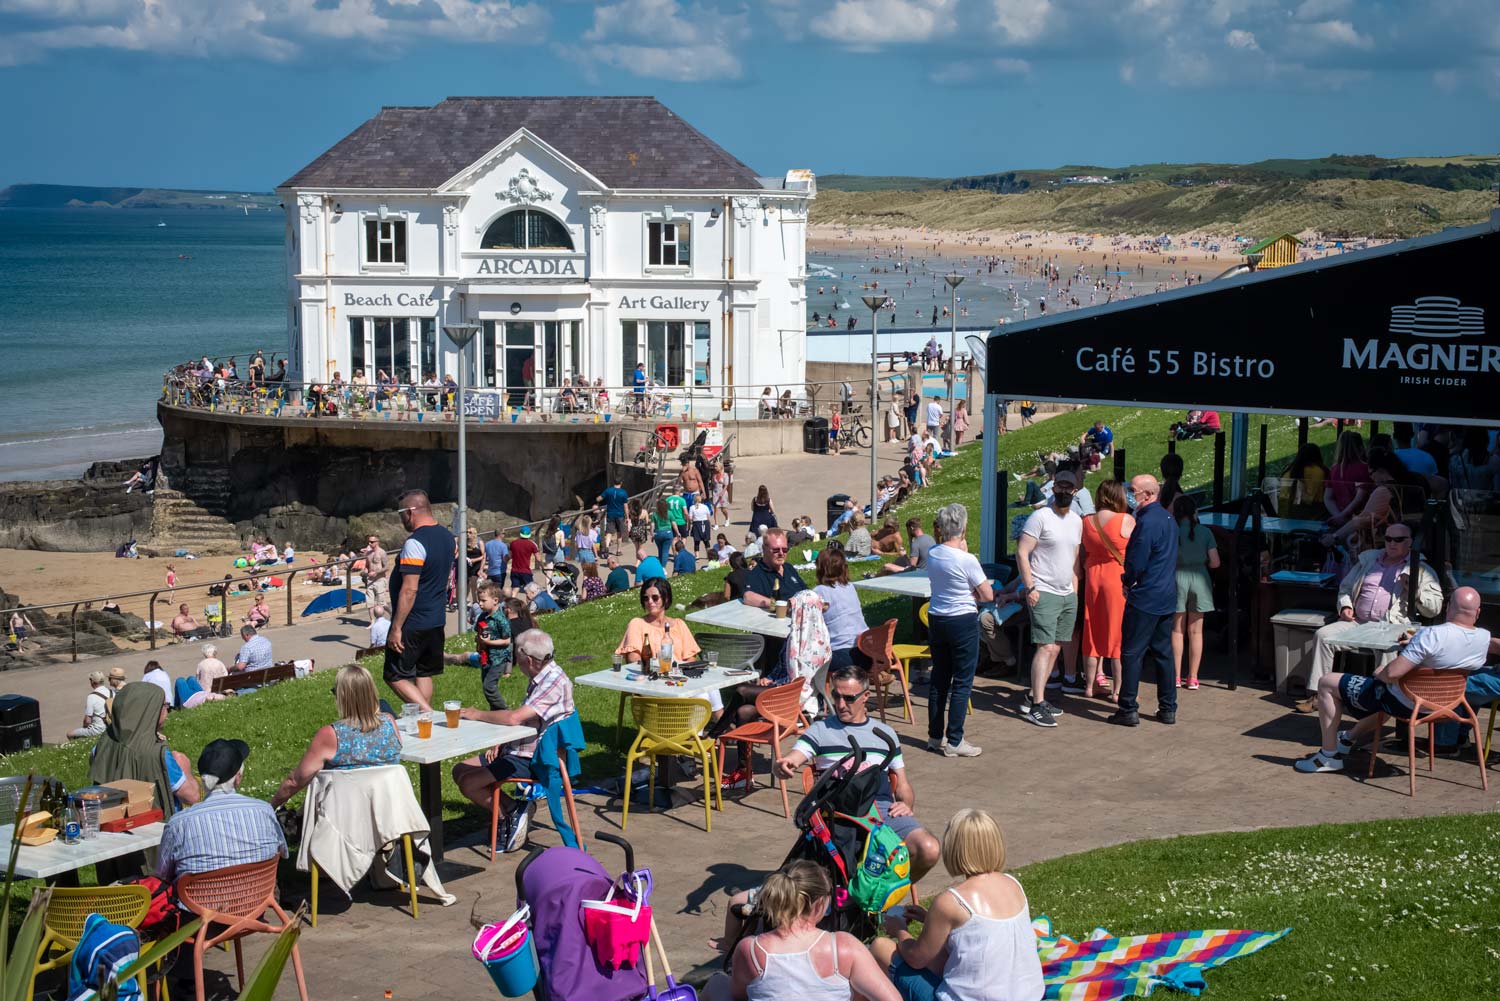 Some will remember the days when The Arcadia was a popular Ballroom. Nowadays it's a popular beach cafe.